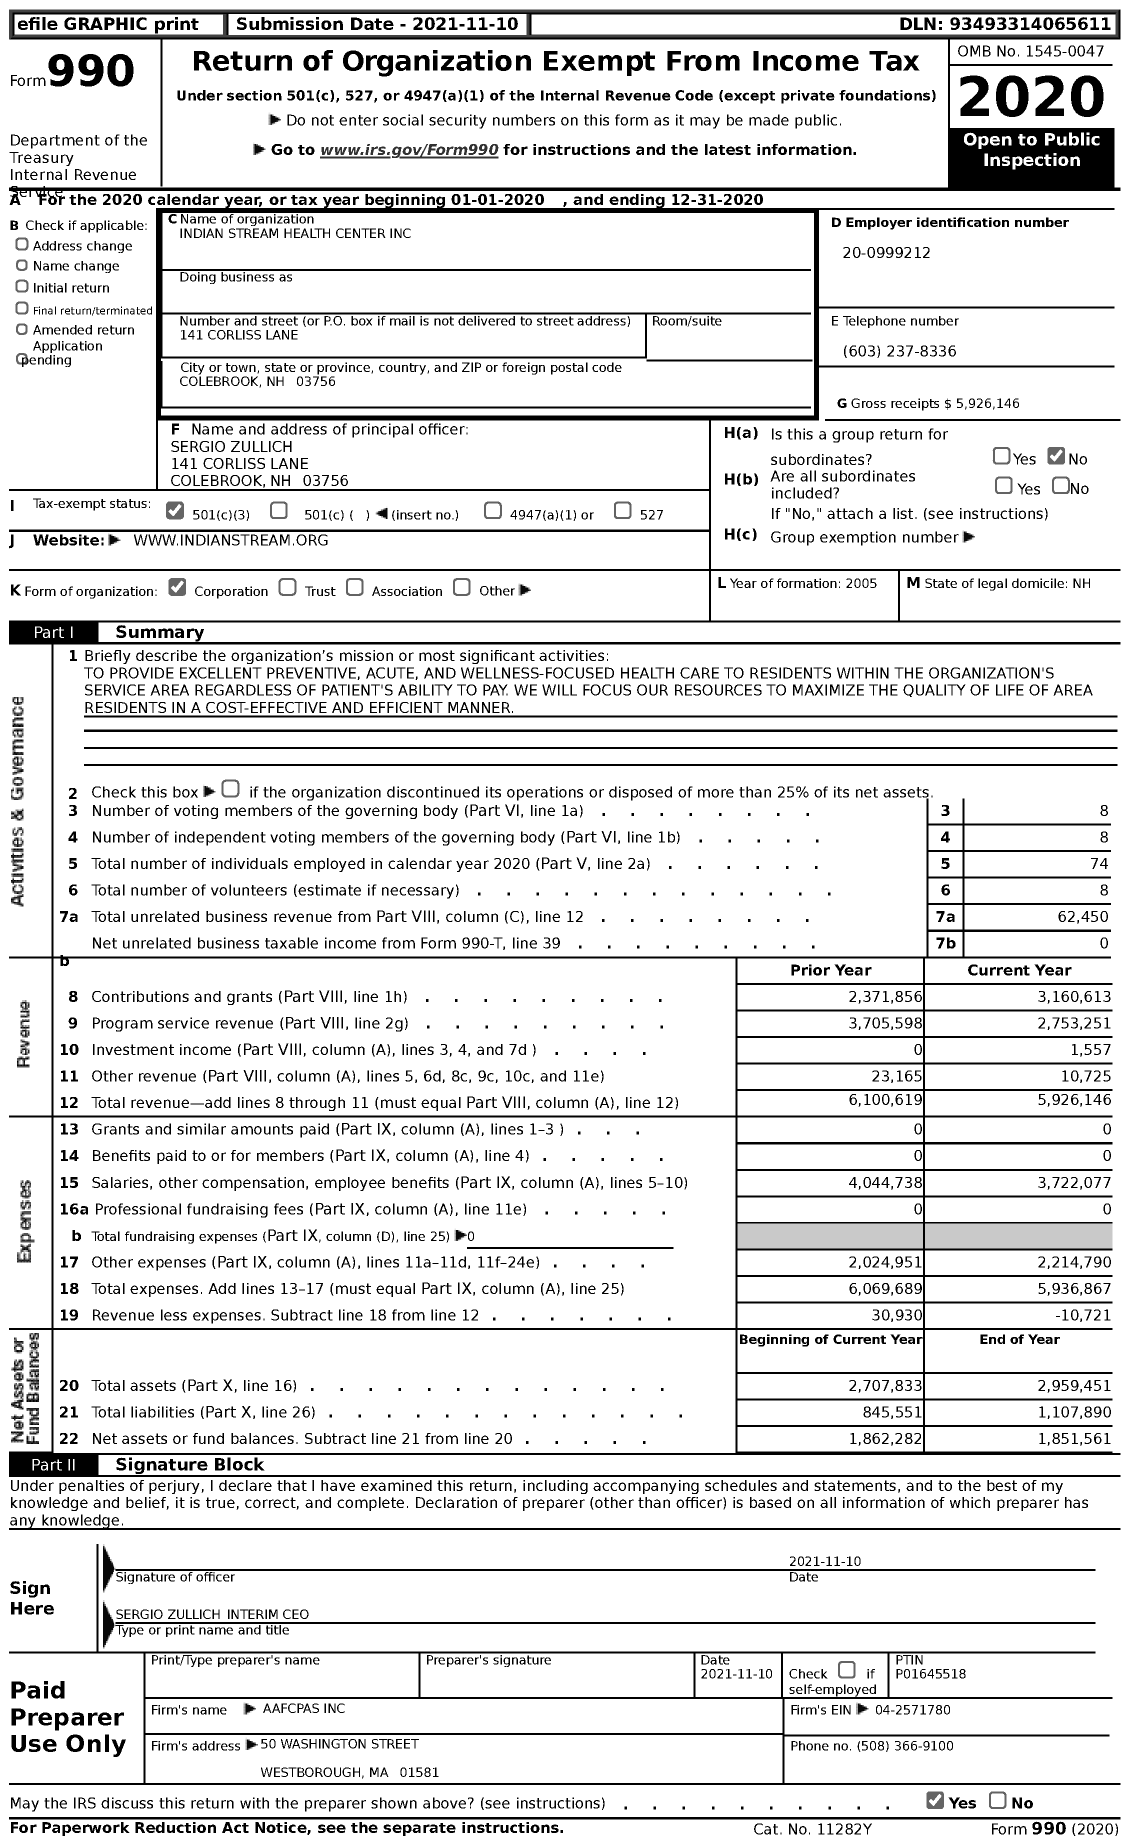 Image of first page of 2020 Form 990 for Indian Stream Health Center (ISHC)